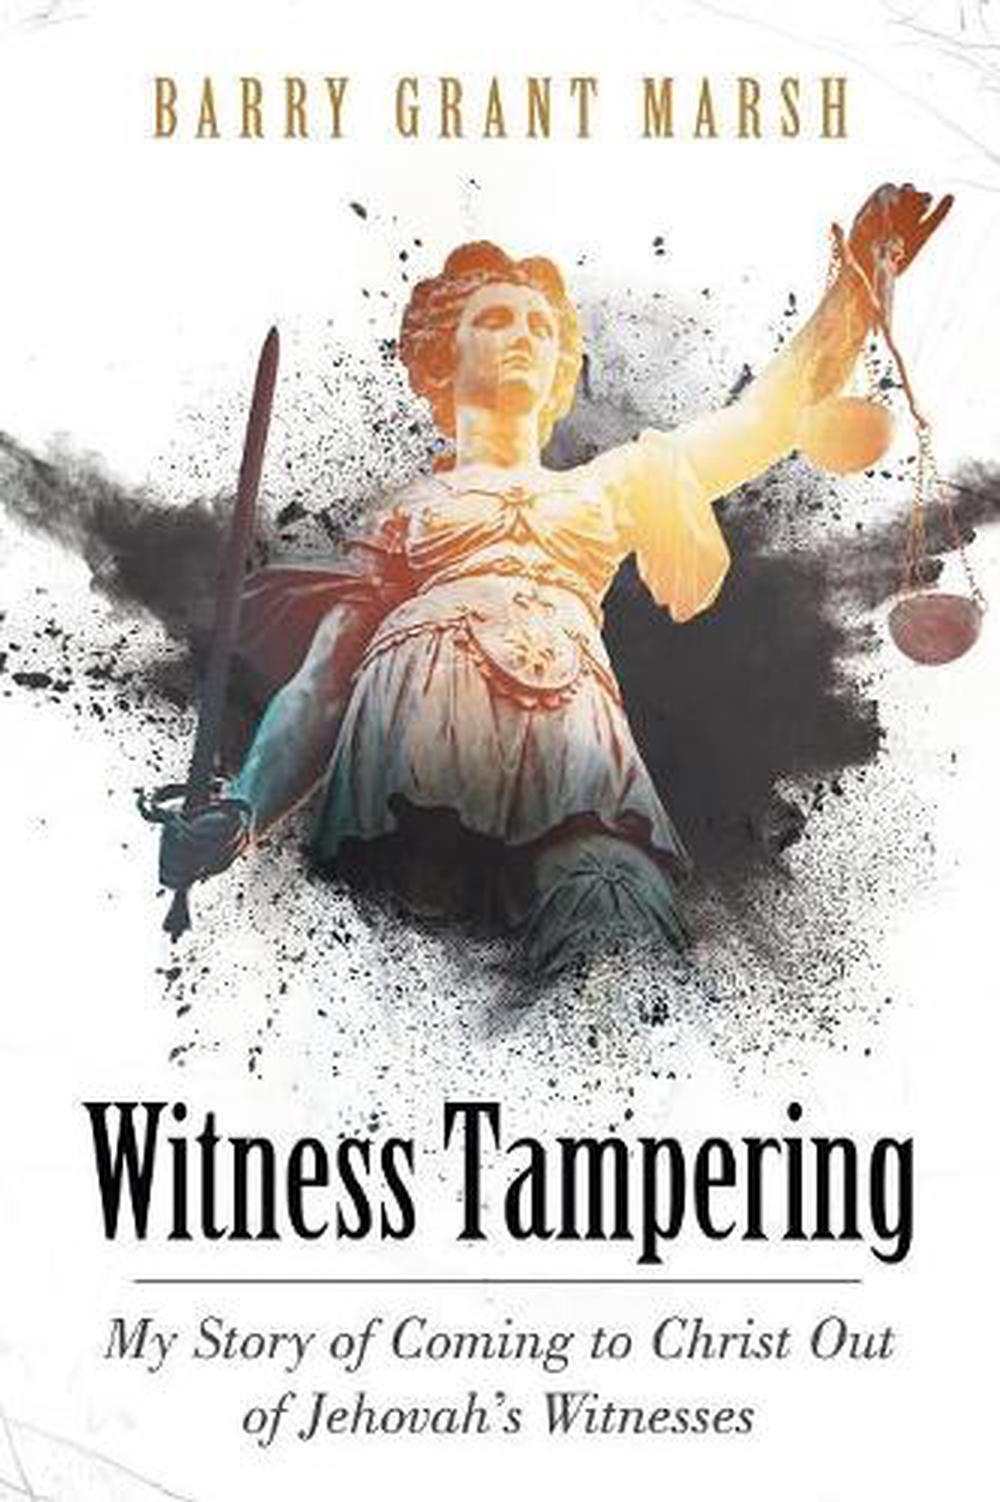 examples of witness tampering